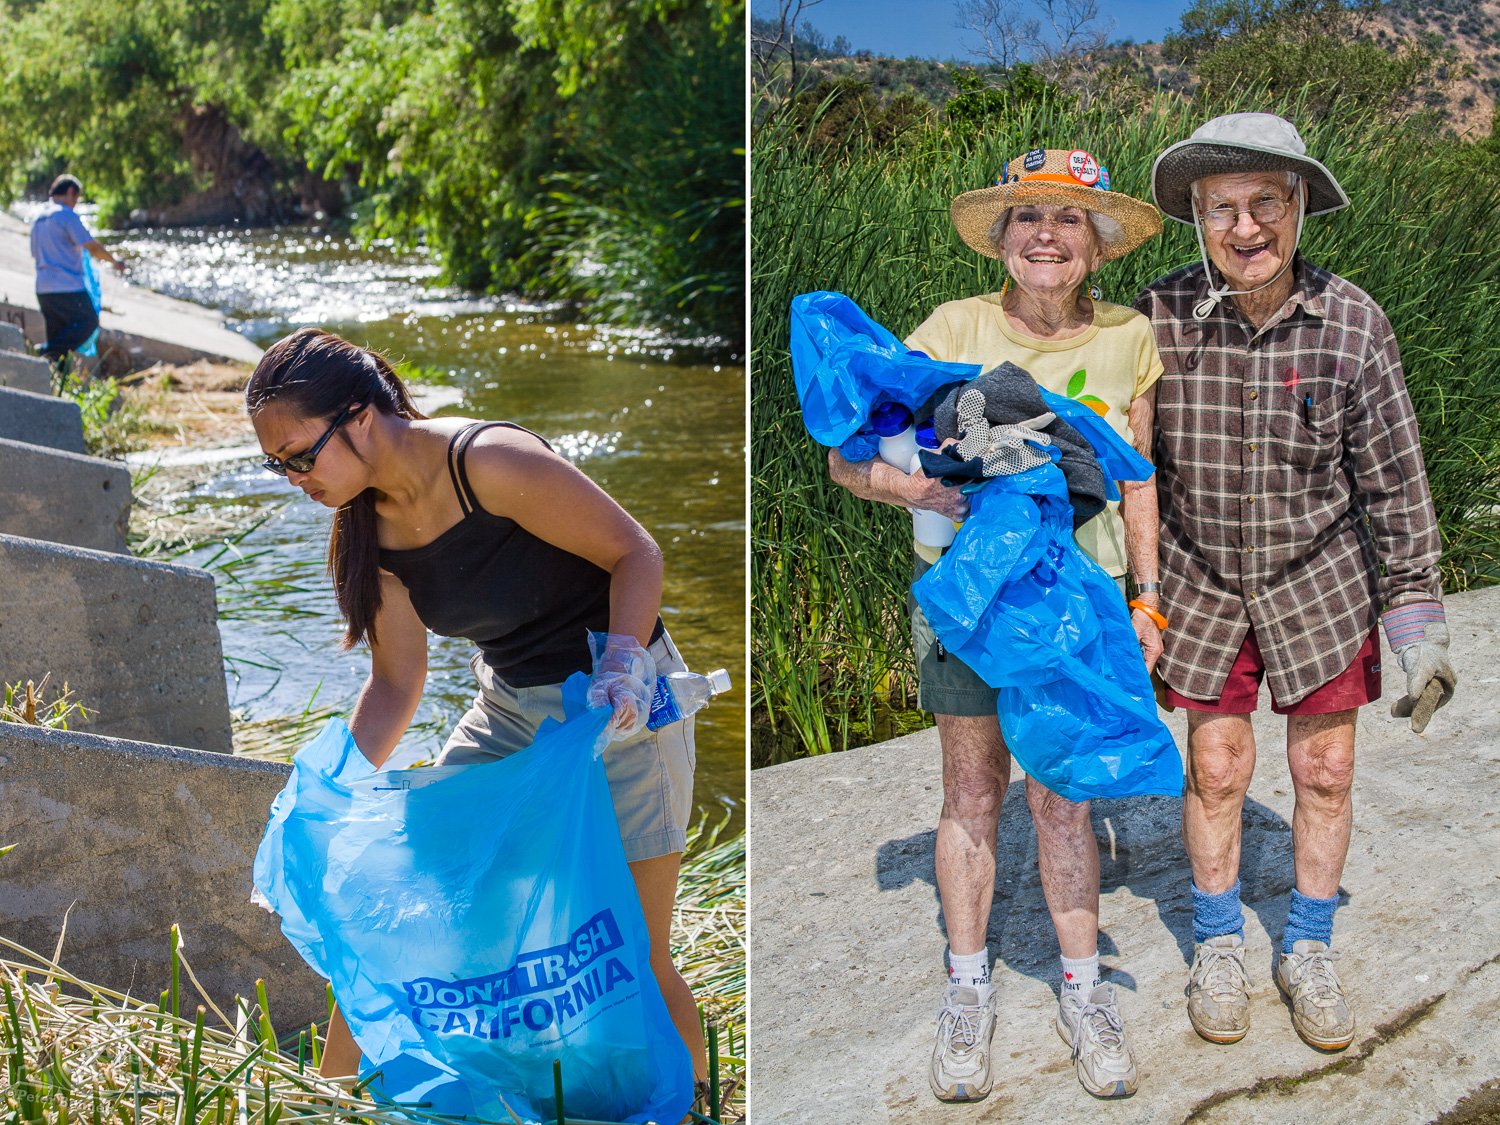  FoLAR's (Friends of the LA River) La Gran Limpieza river cleanup removes tons of trash and palstic bags each year and helps educate the public about plastic blight in our rivers and streams. 